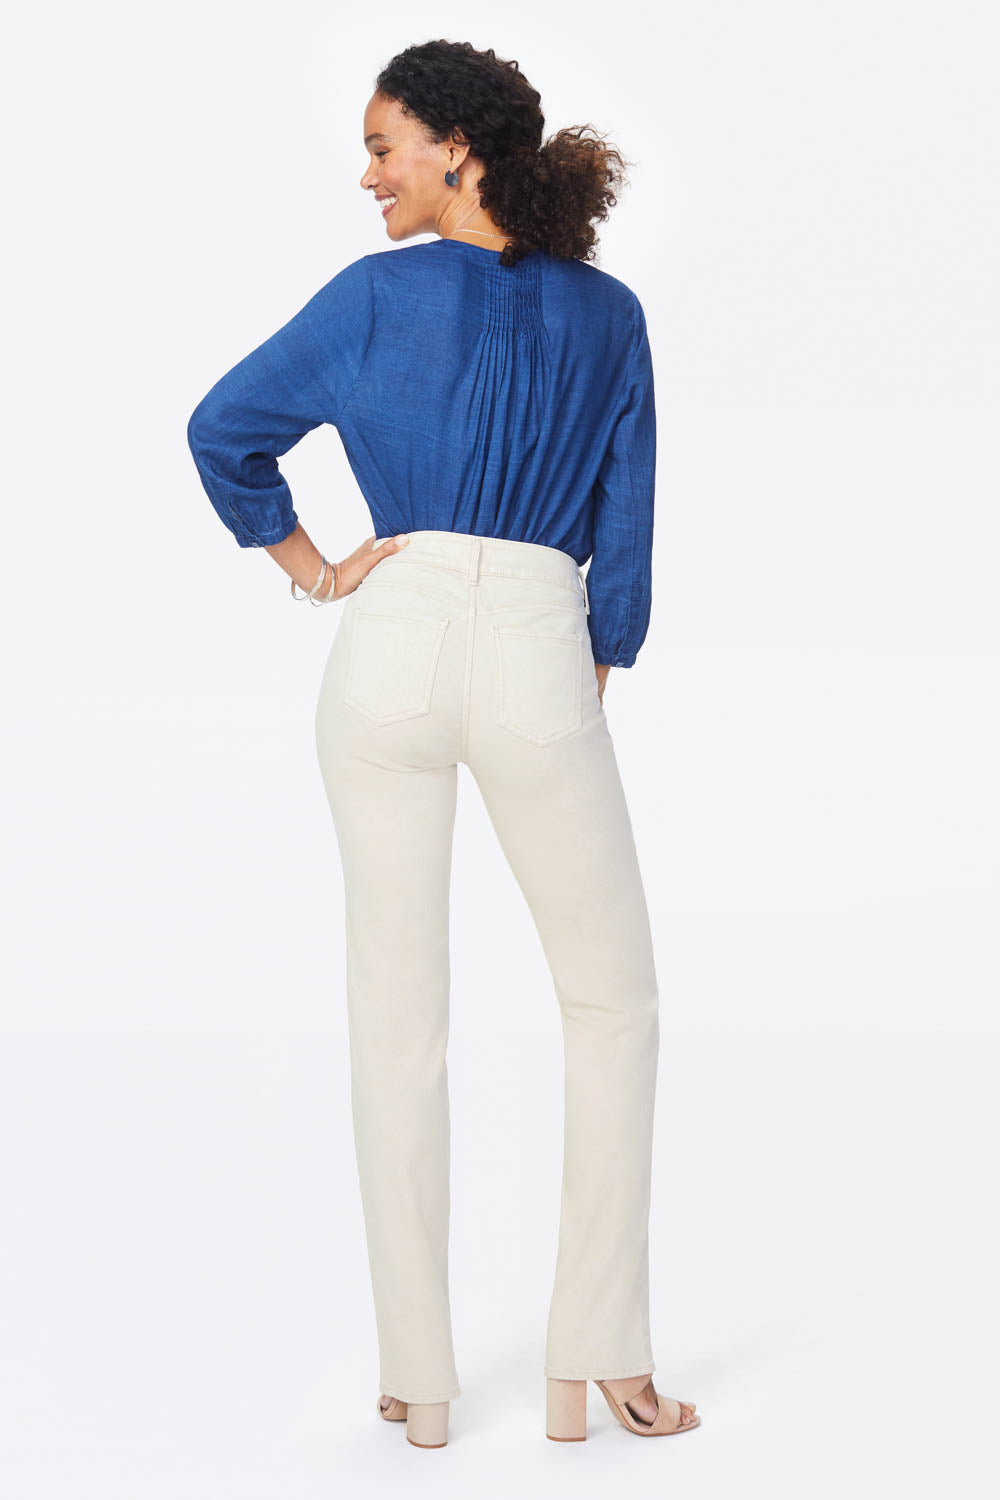 NYDJ Marilyn Straight Jeans In Petite  - Feather